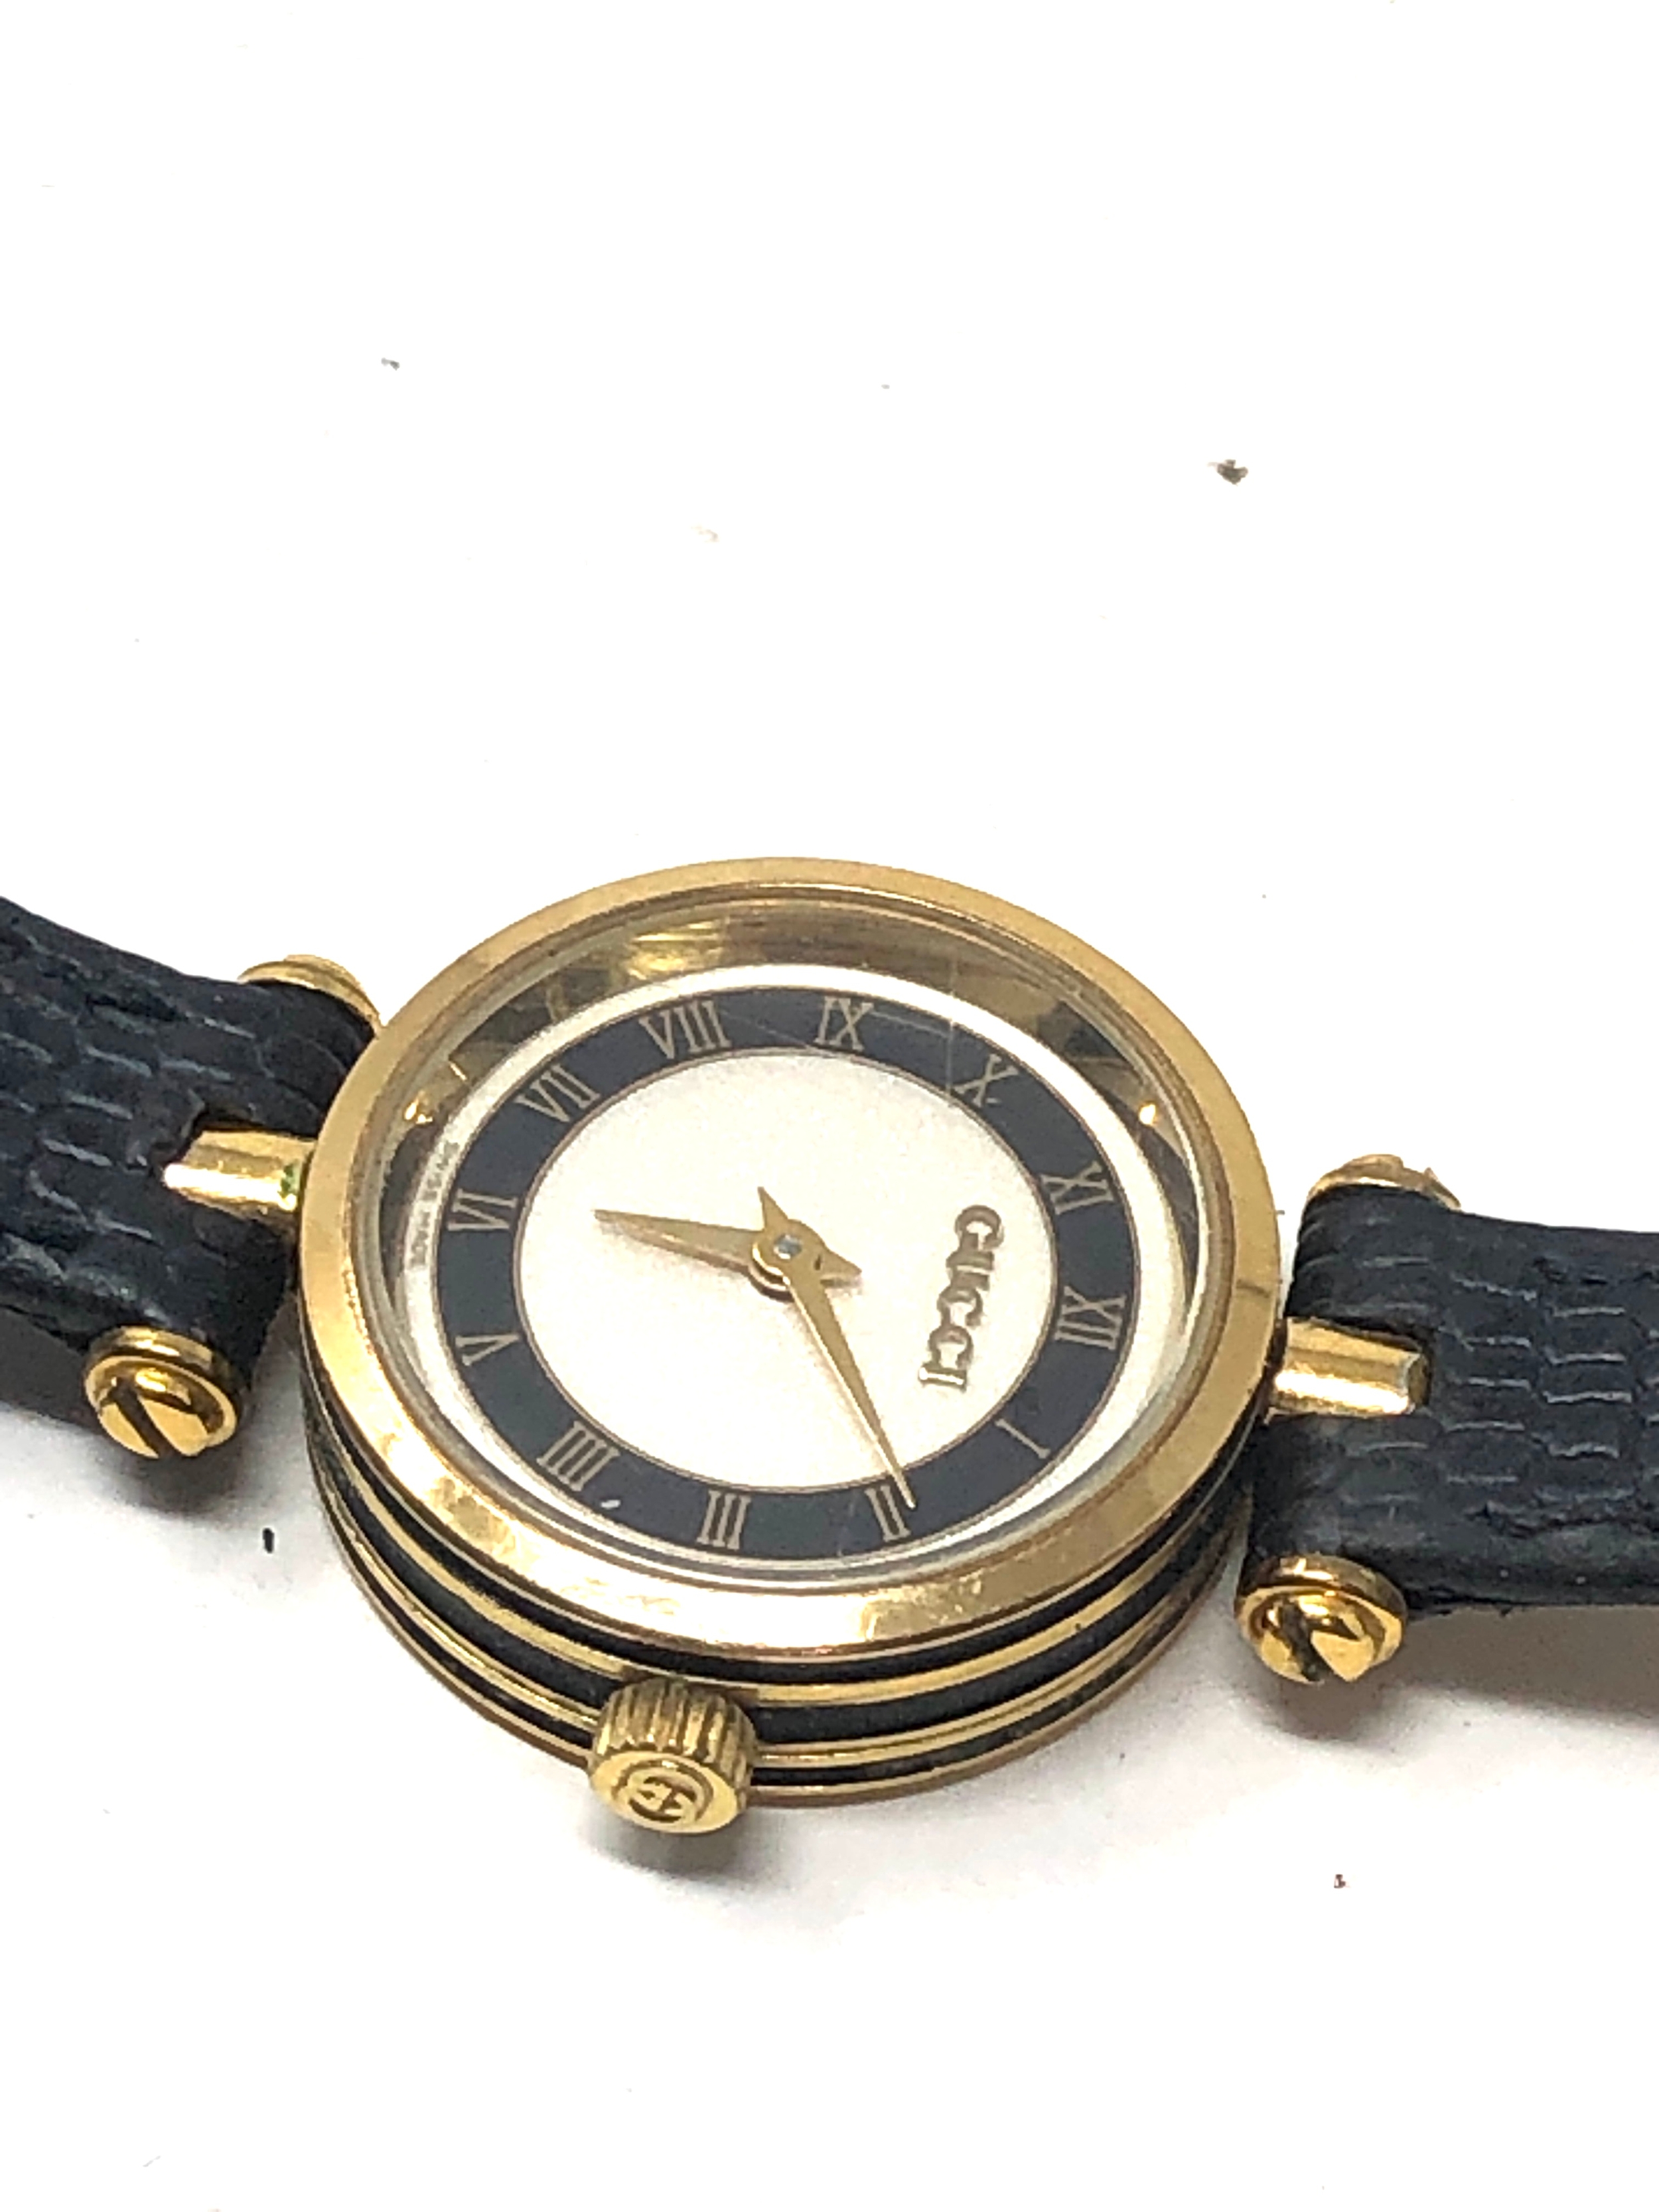 Boxed ladies gucci quartz wristwatch the watch is not ticking - Image 2 of 3